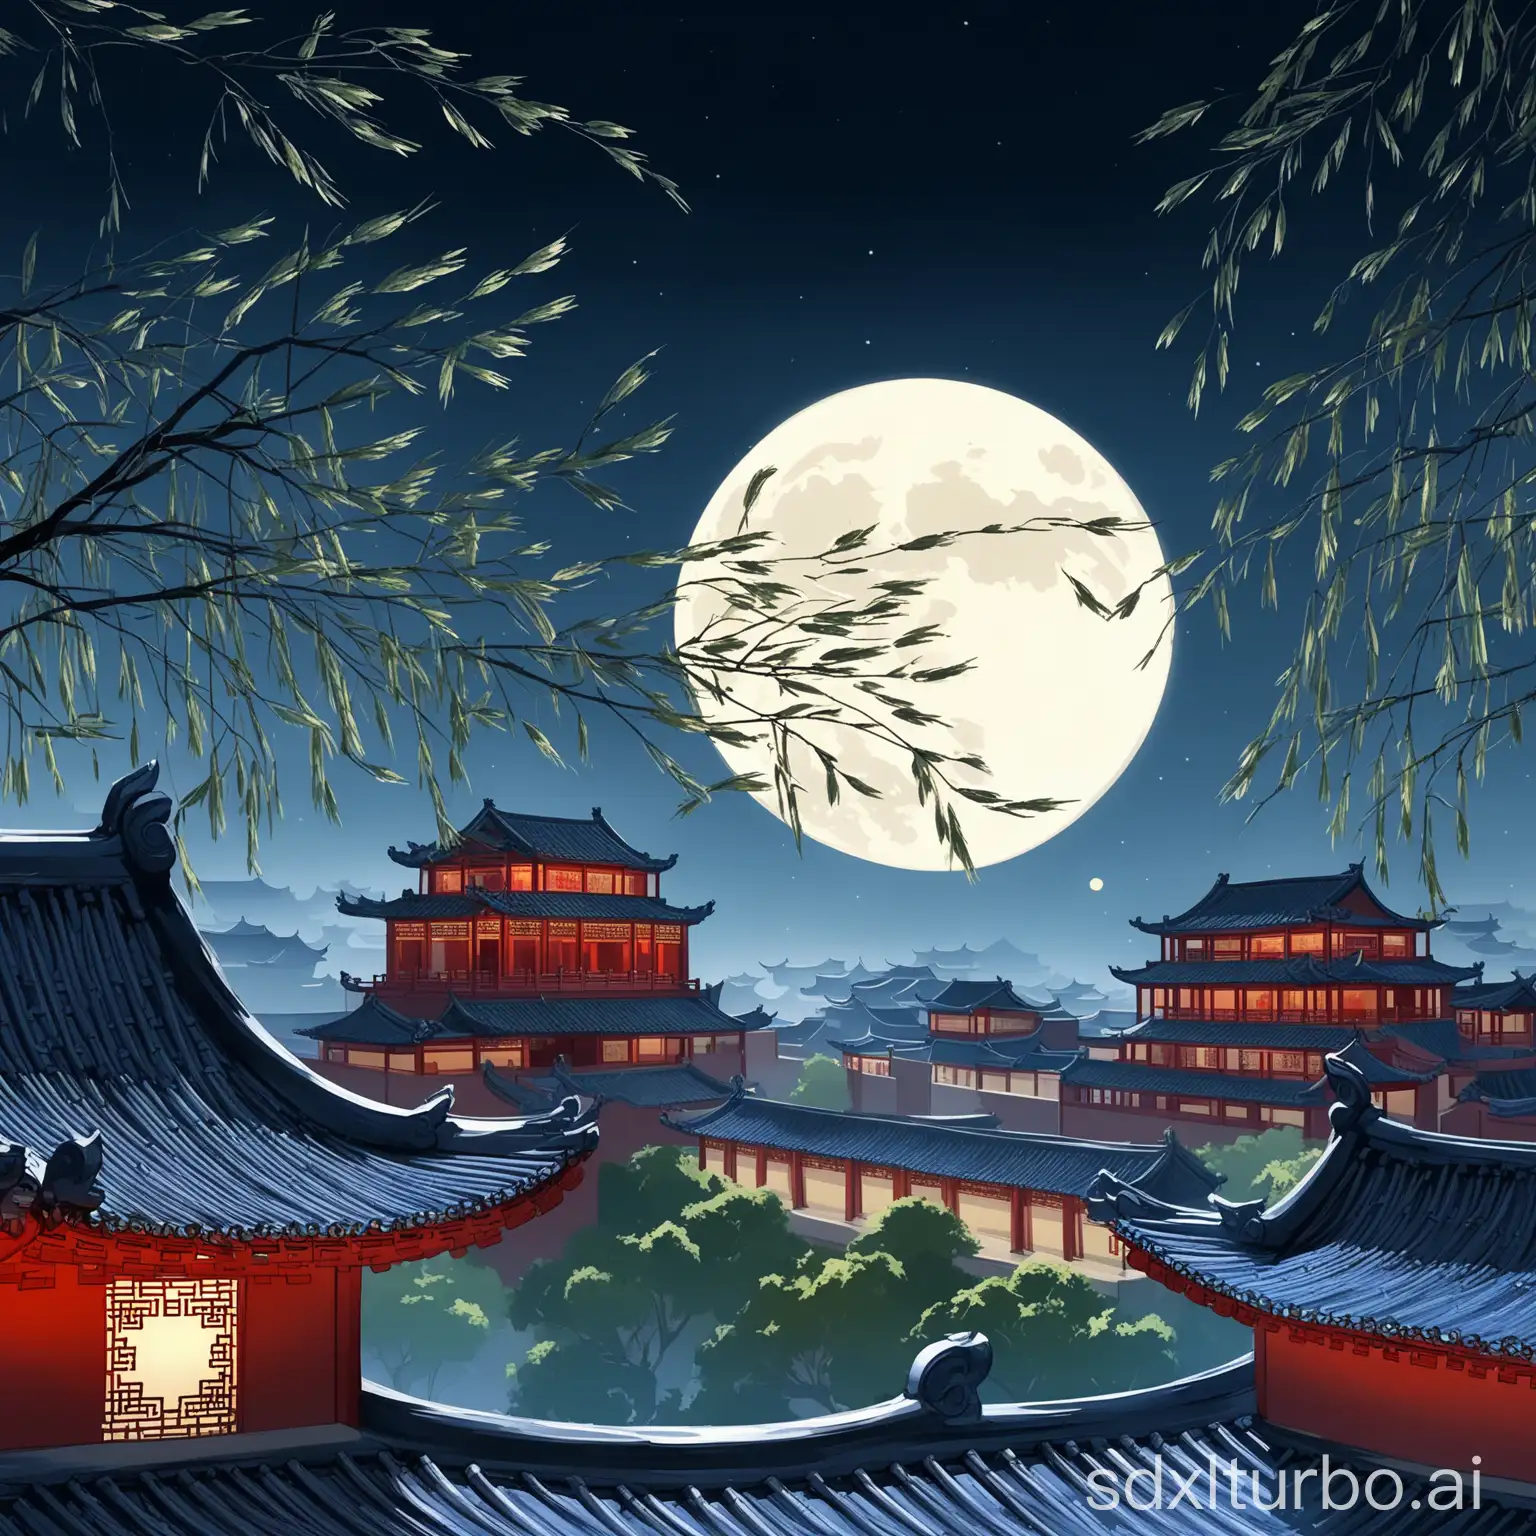 Serene-Moonlit-Night-Over-Chinese-Architecture-with-Willow-Trees